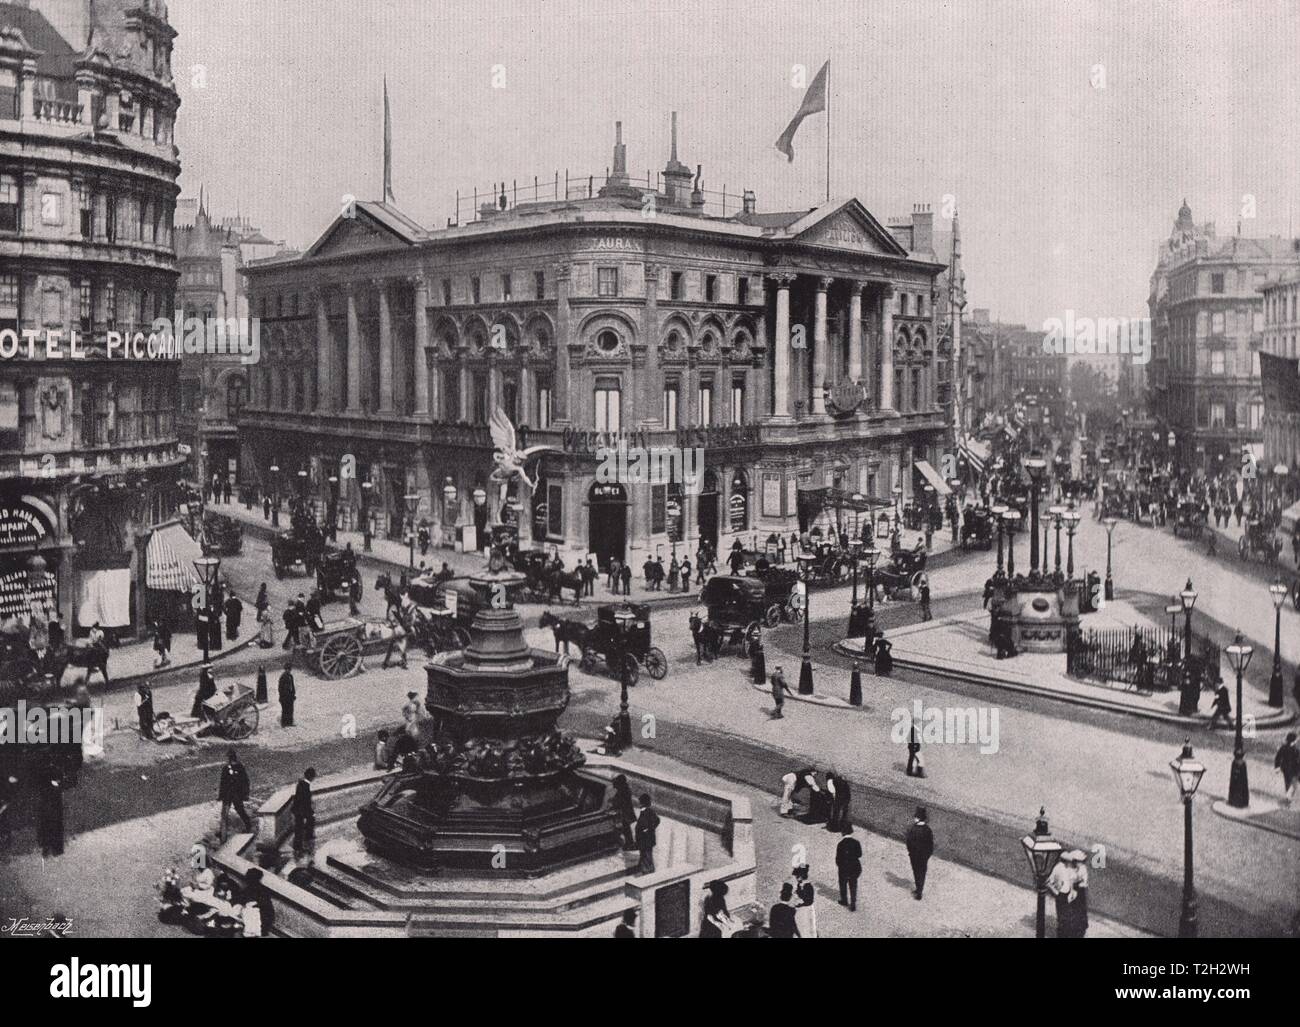 Piccadilly Circus - Showing the Shaftesbury Memorial Fountain and the London Pavilion Stock Photo